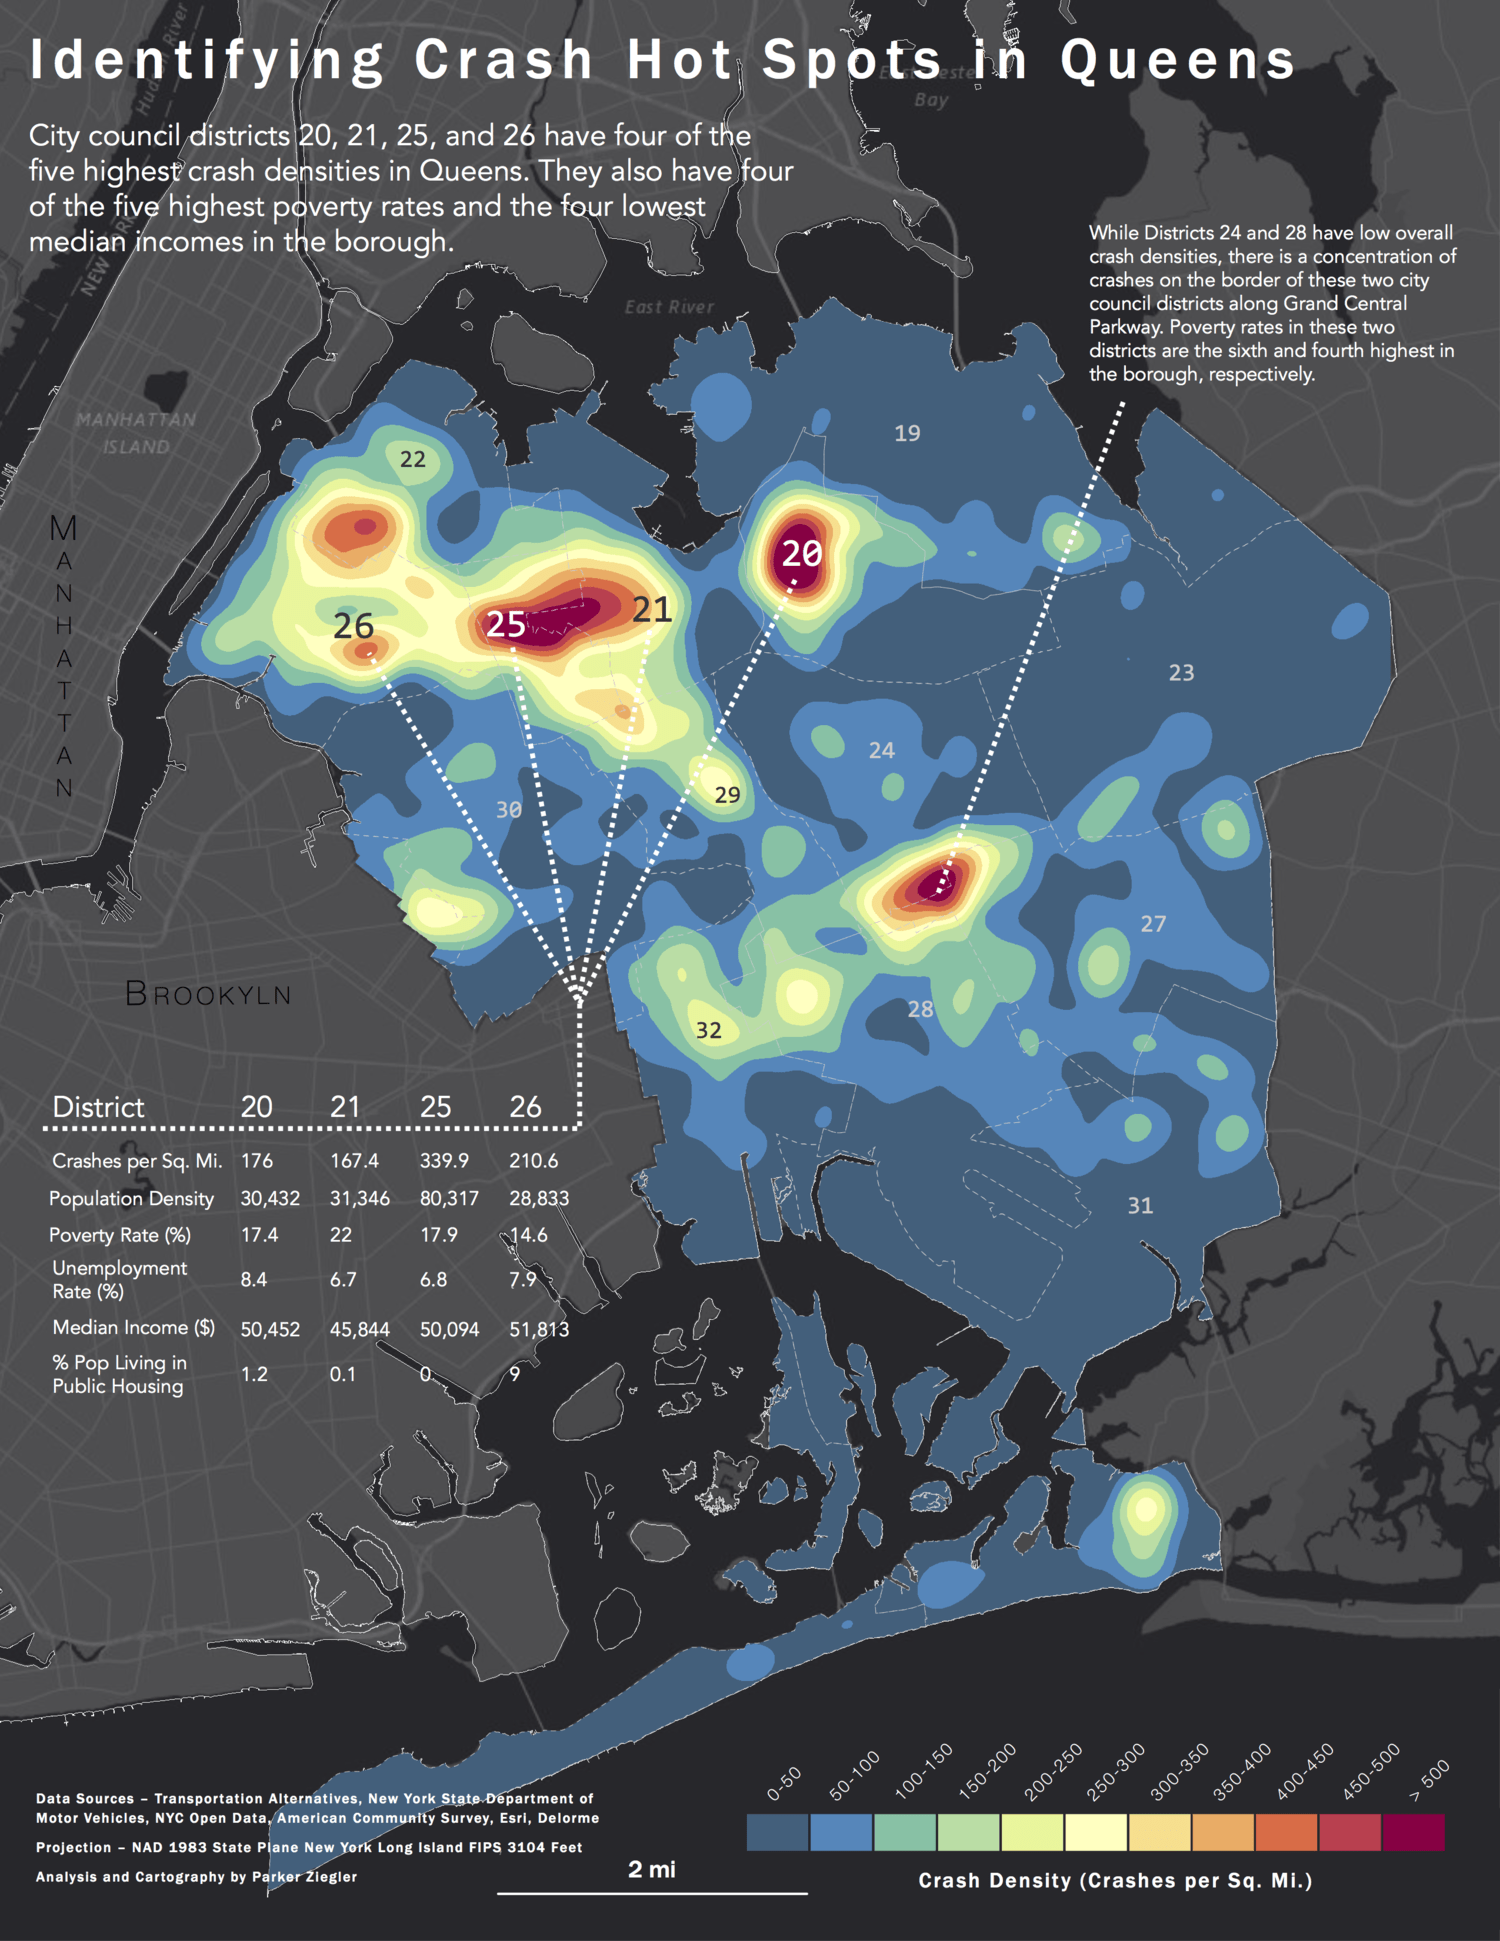 A heat map of traffic crashes in Queens, New York between 2013 and 2015.